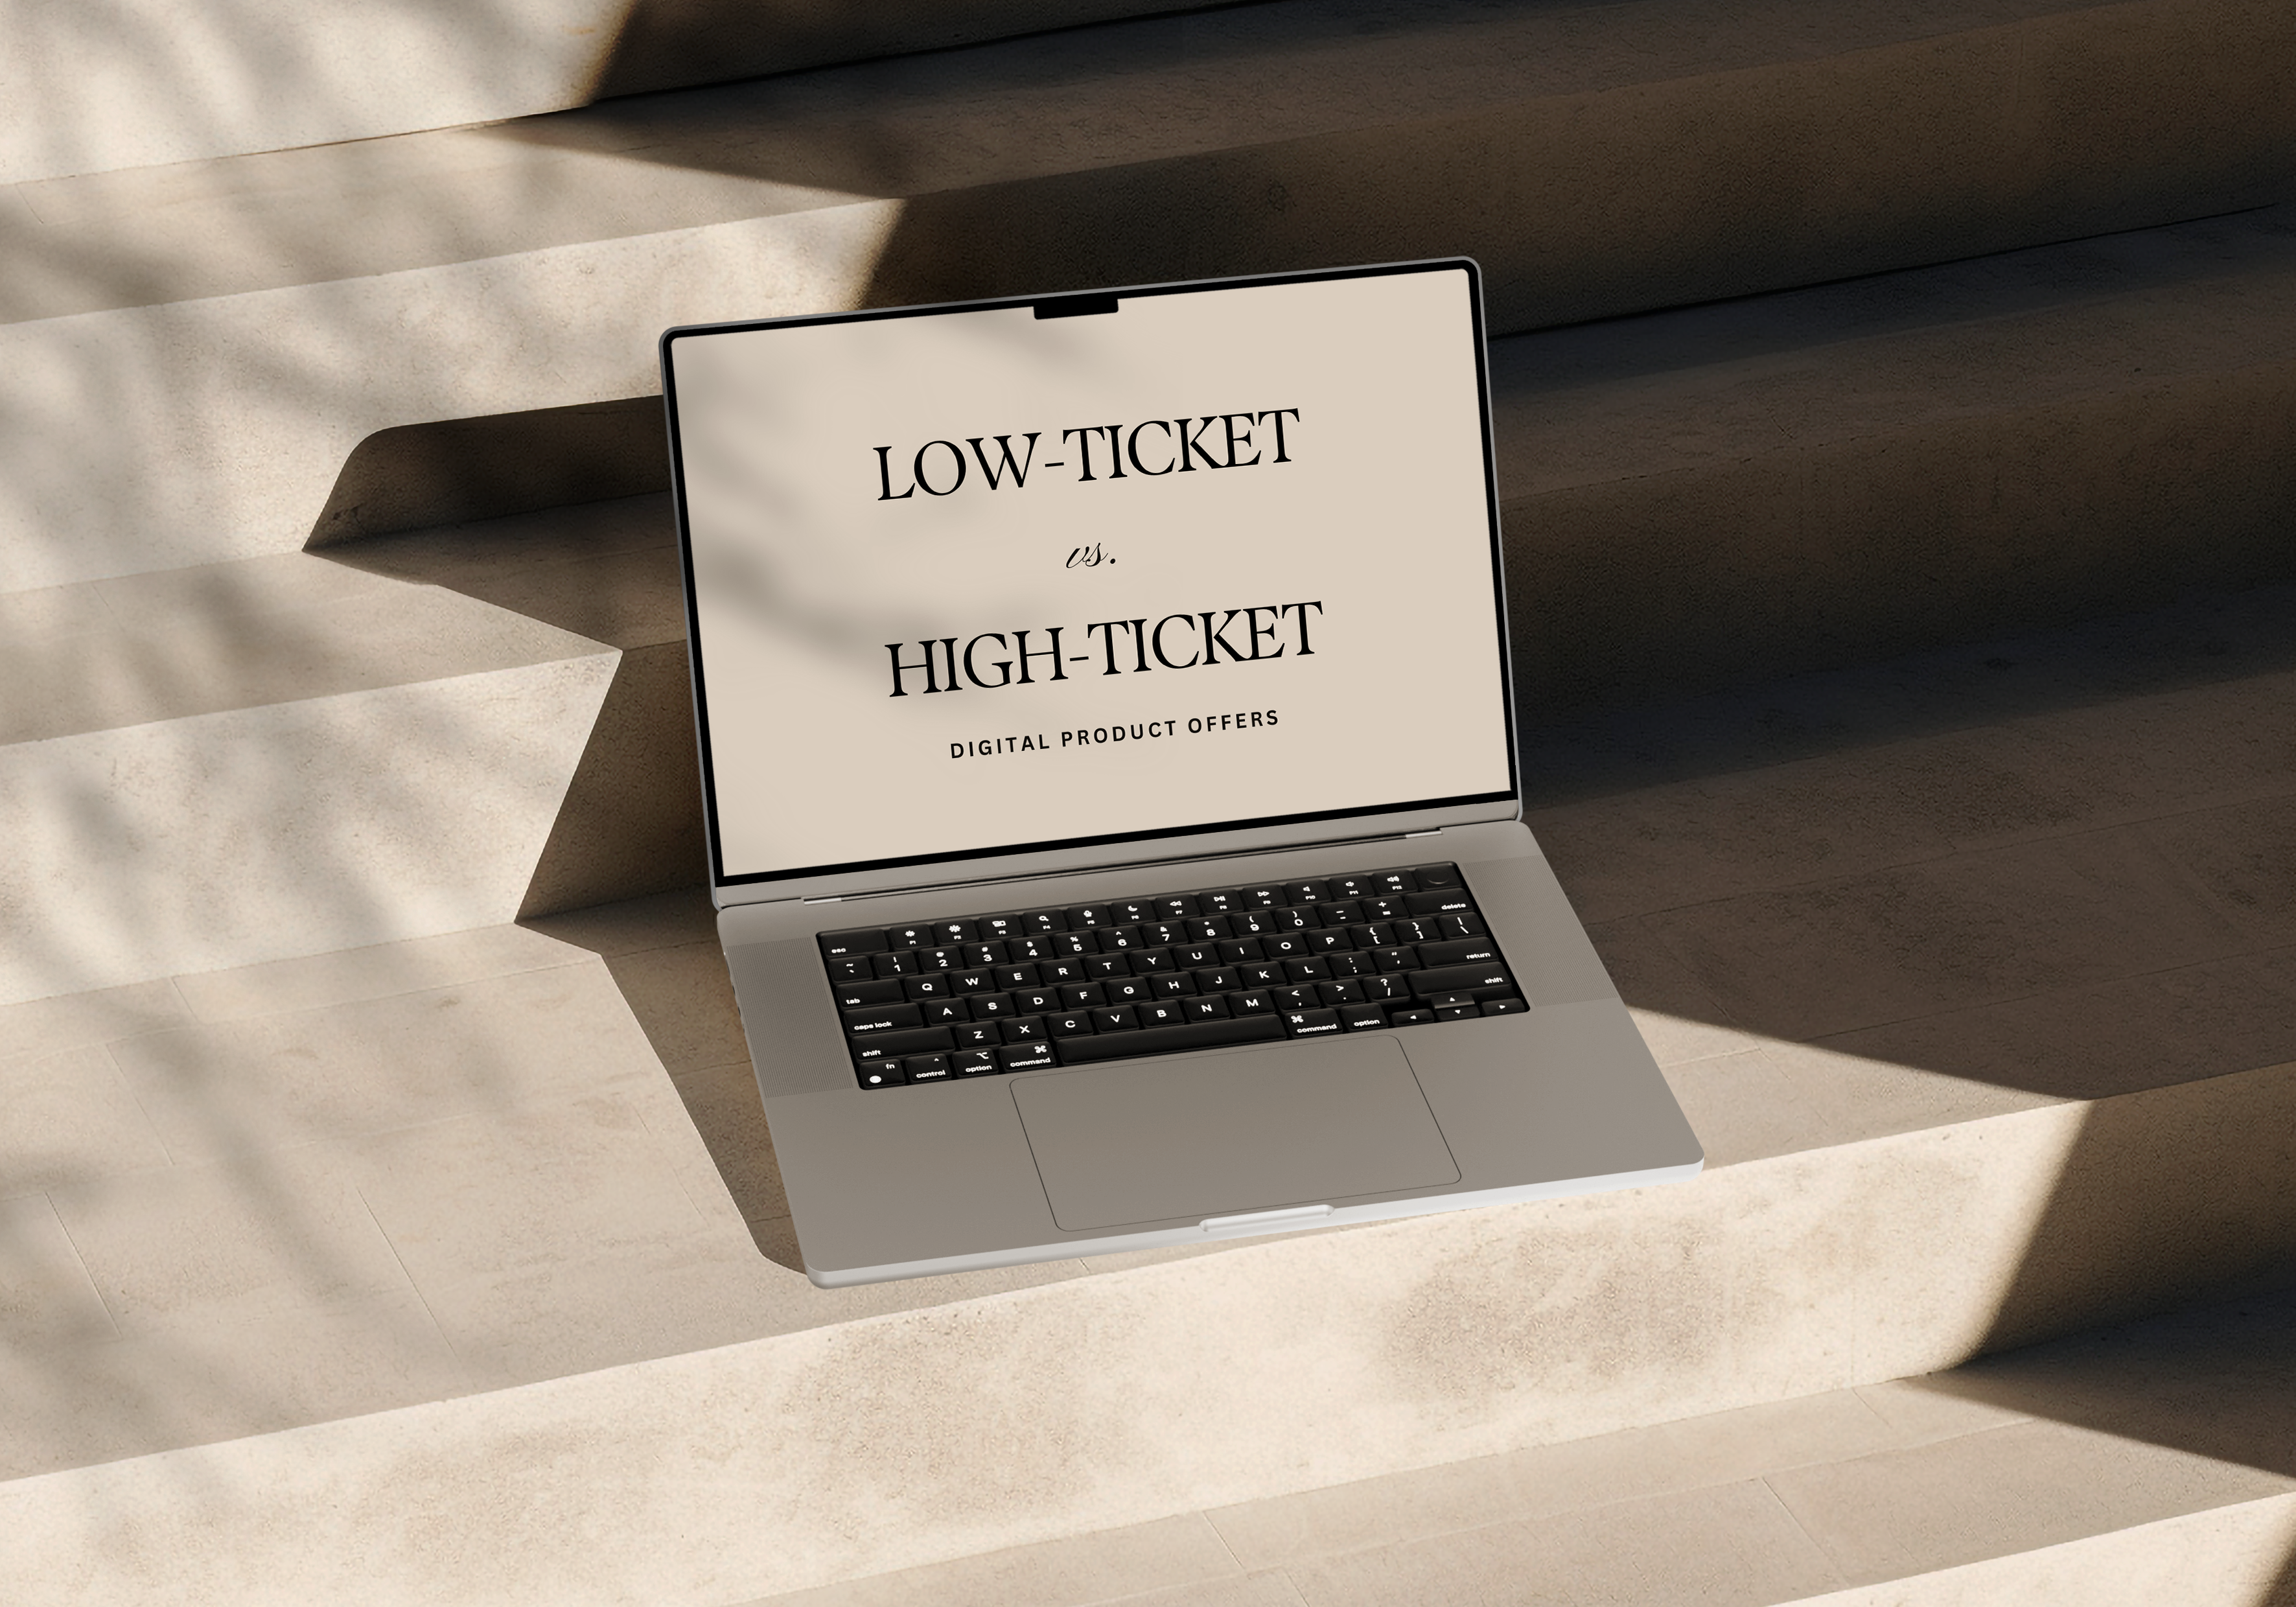 Open laptop that says Lo ticket vs high ticket digital product offers